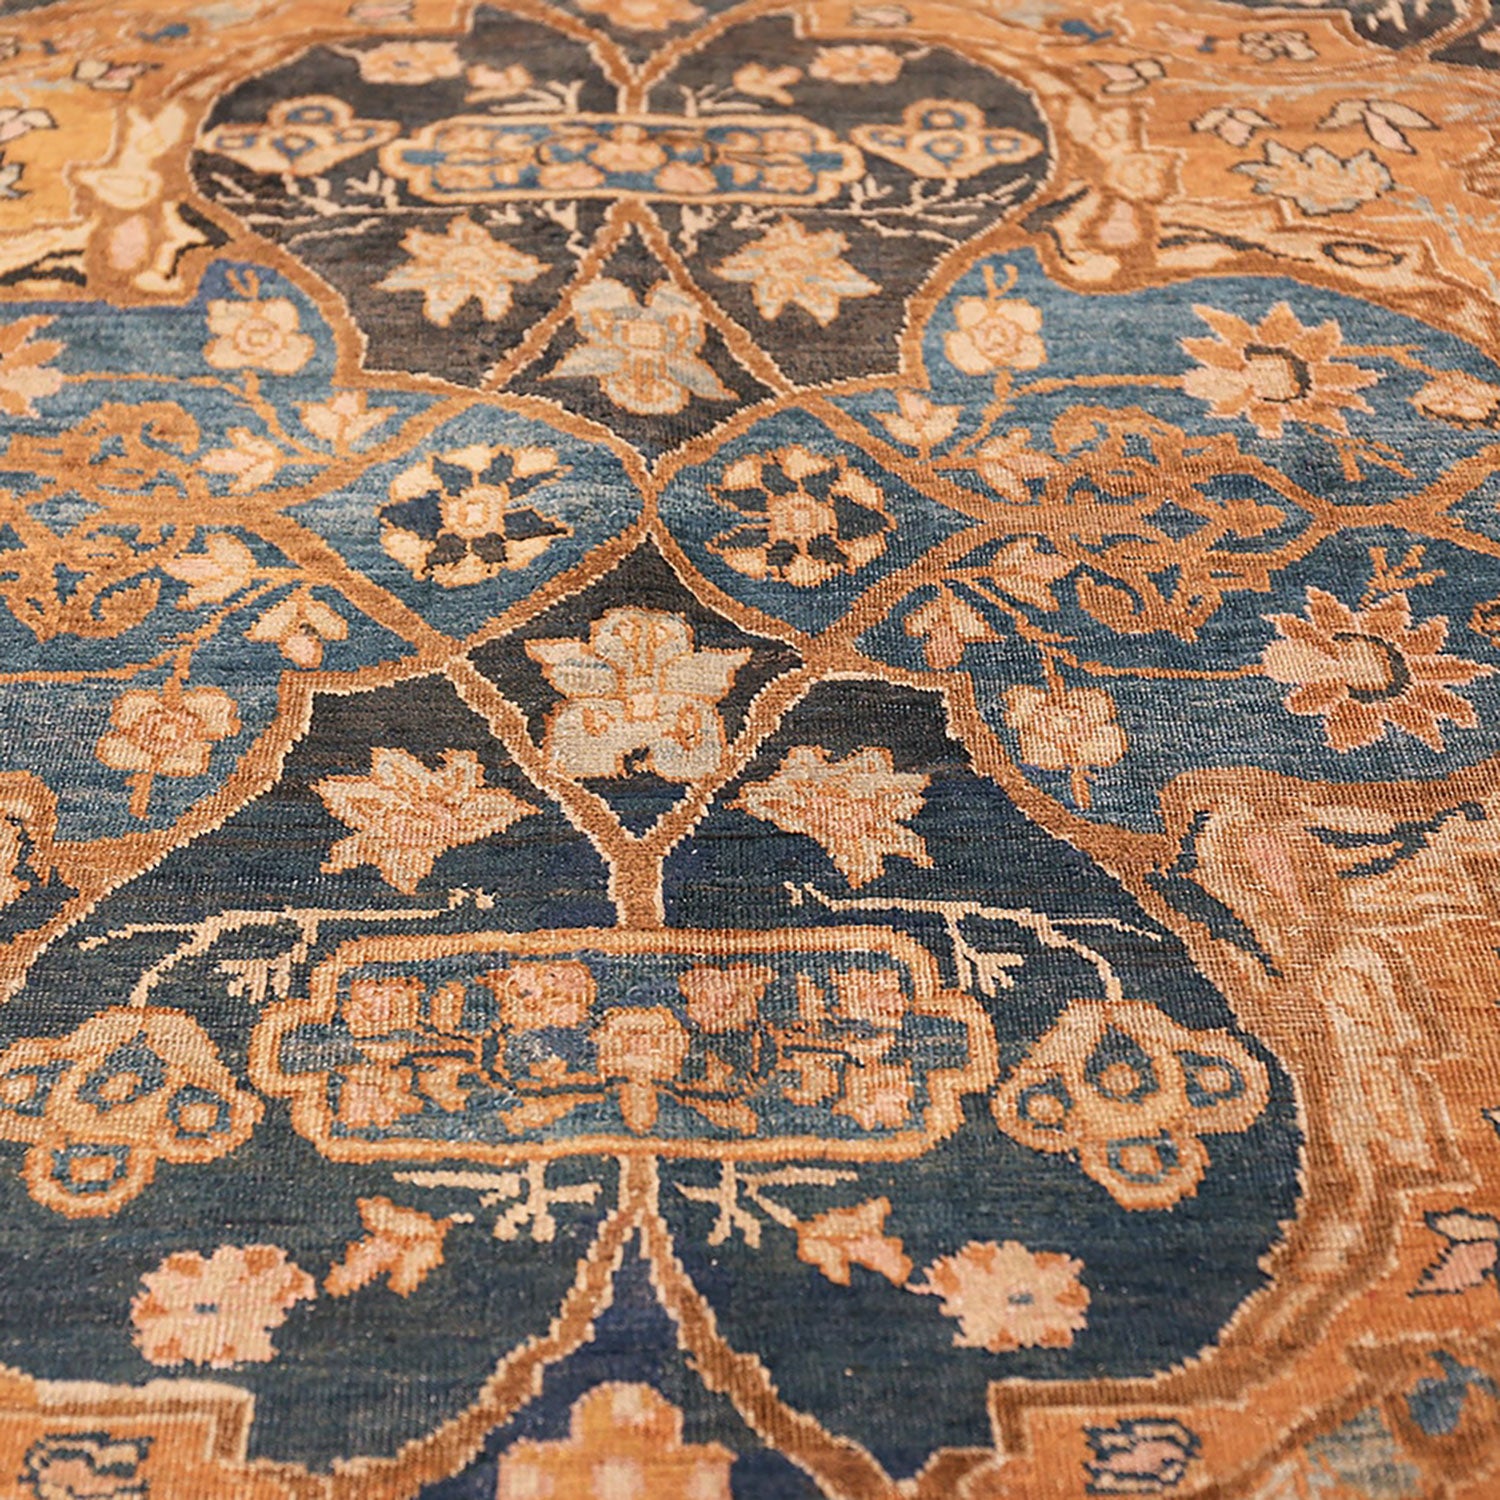 Close-up of an ornate rug featuring intricate floral and geometric motifs in shades of blue and orange.